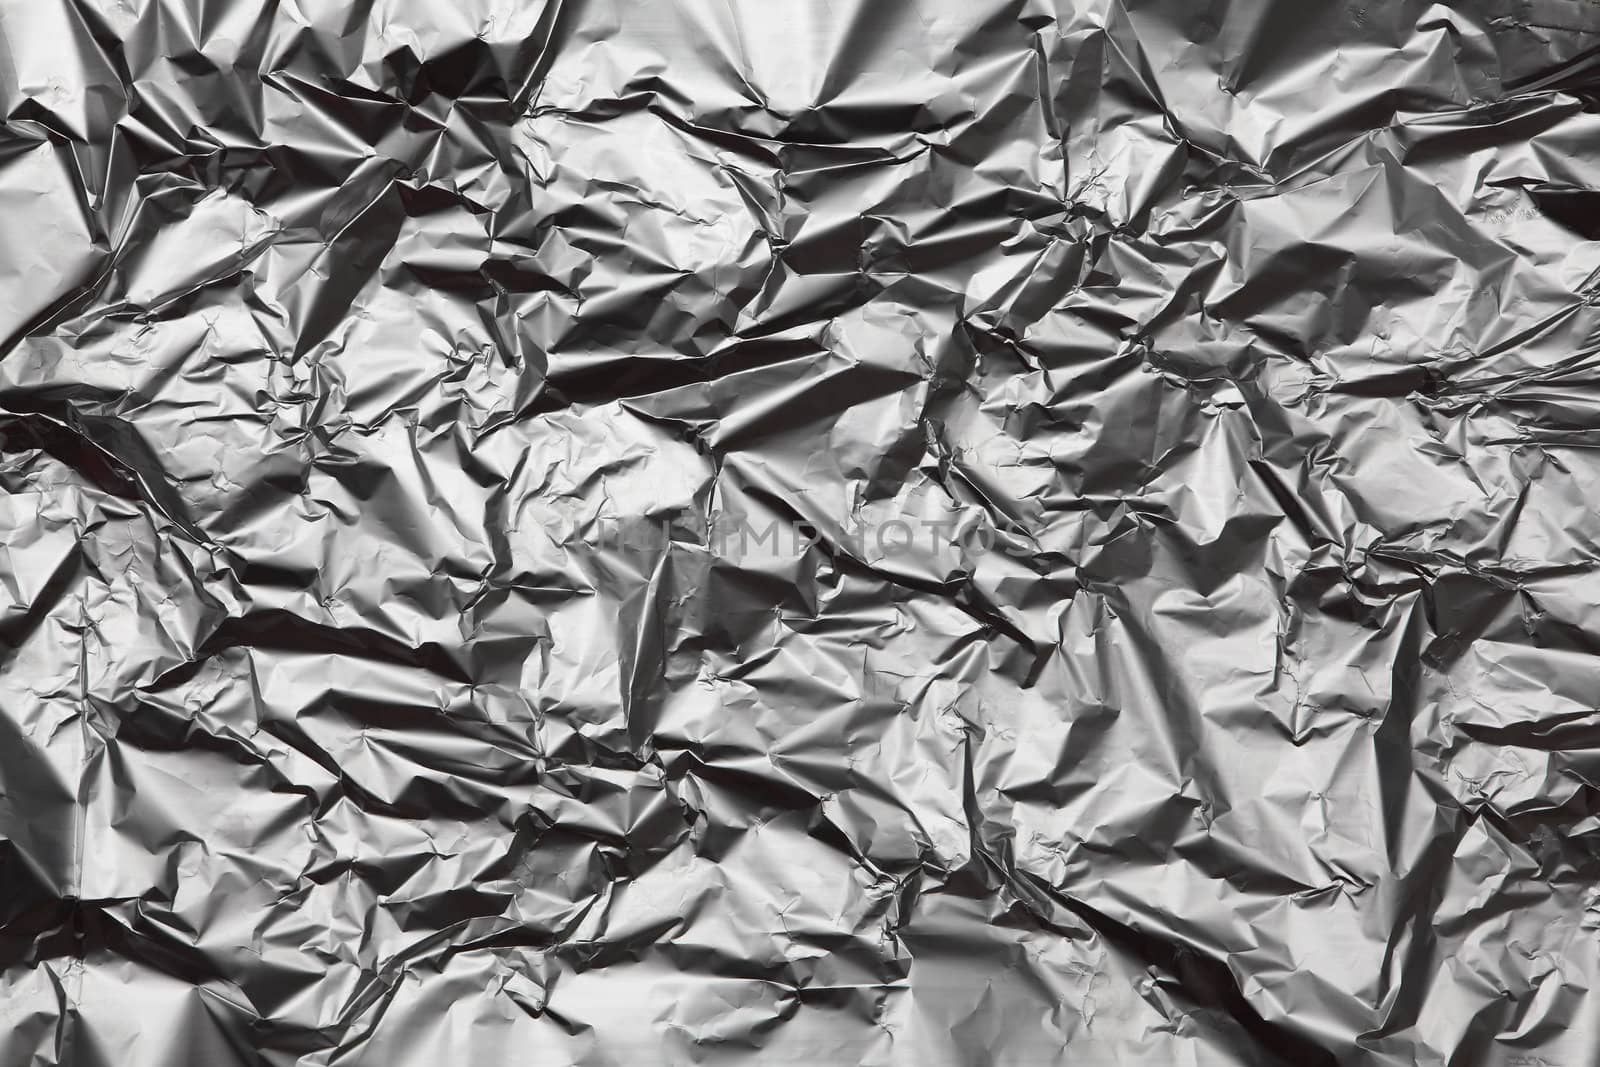 Photo of the dull side of a sheet of cooking aluminum foil wrap.